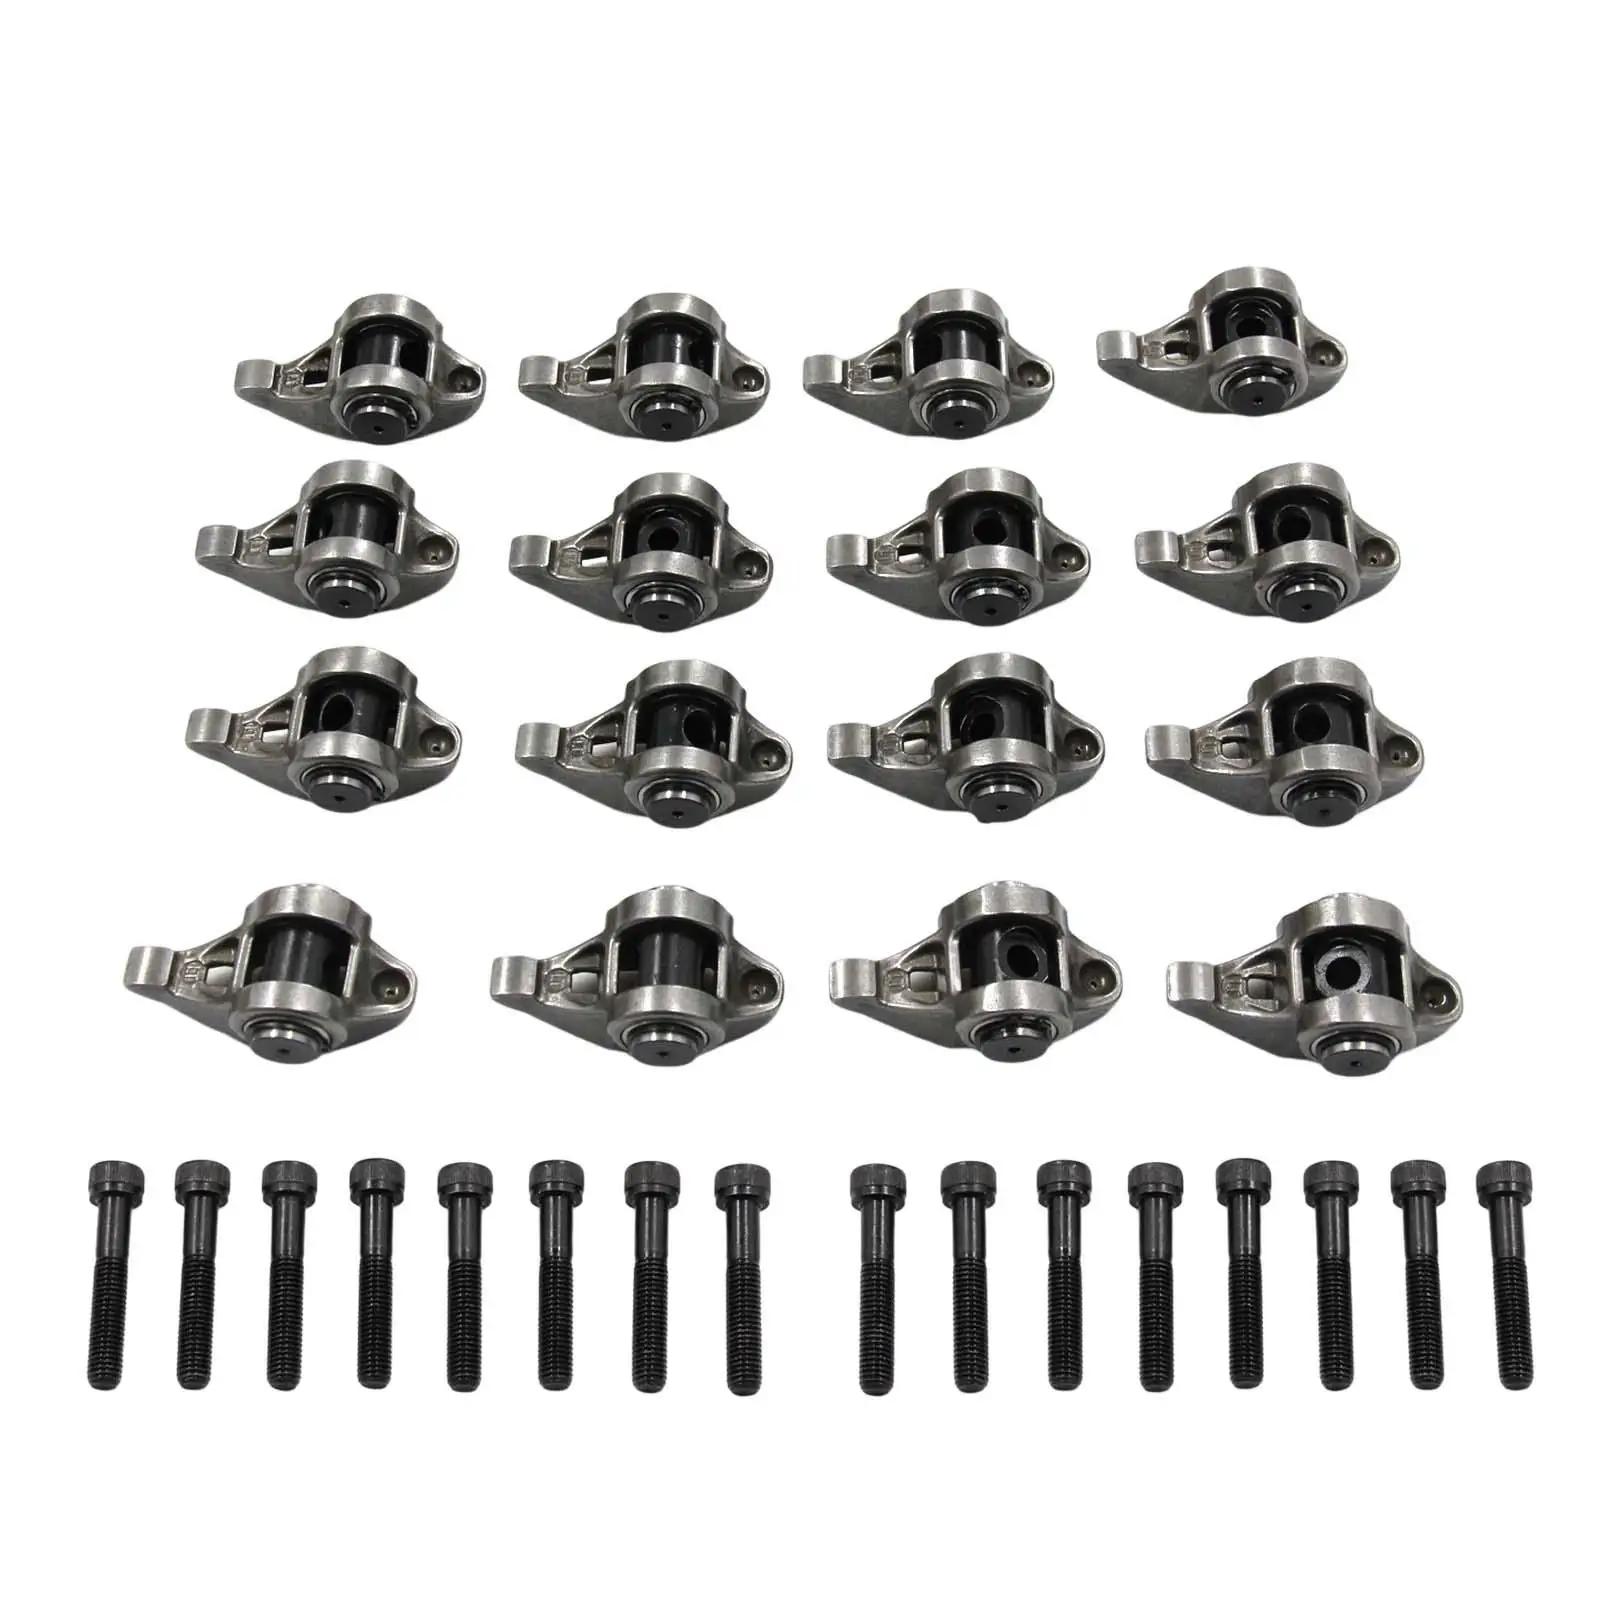 16x Rocker Arms and Bolts Kit for Chevrolet LS1 LS2 LS6 LM7 L59 LM4 L33